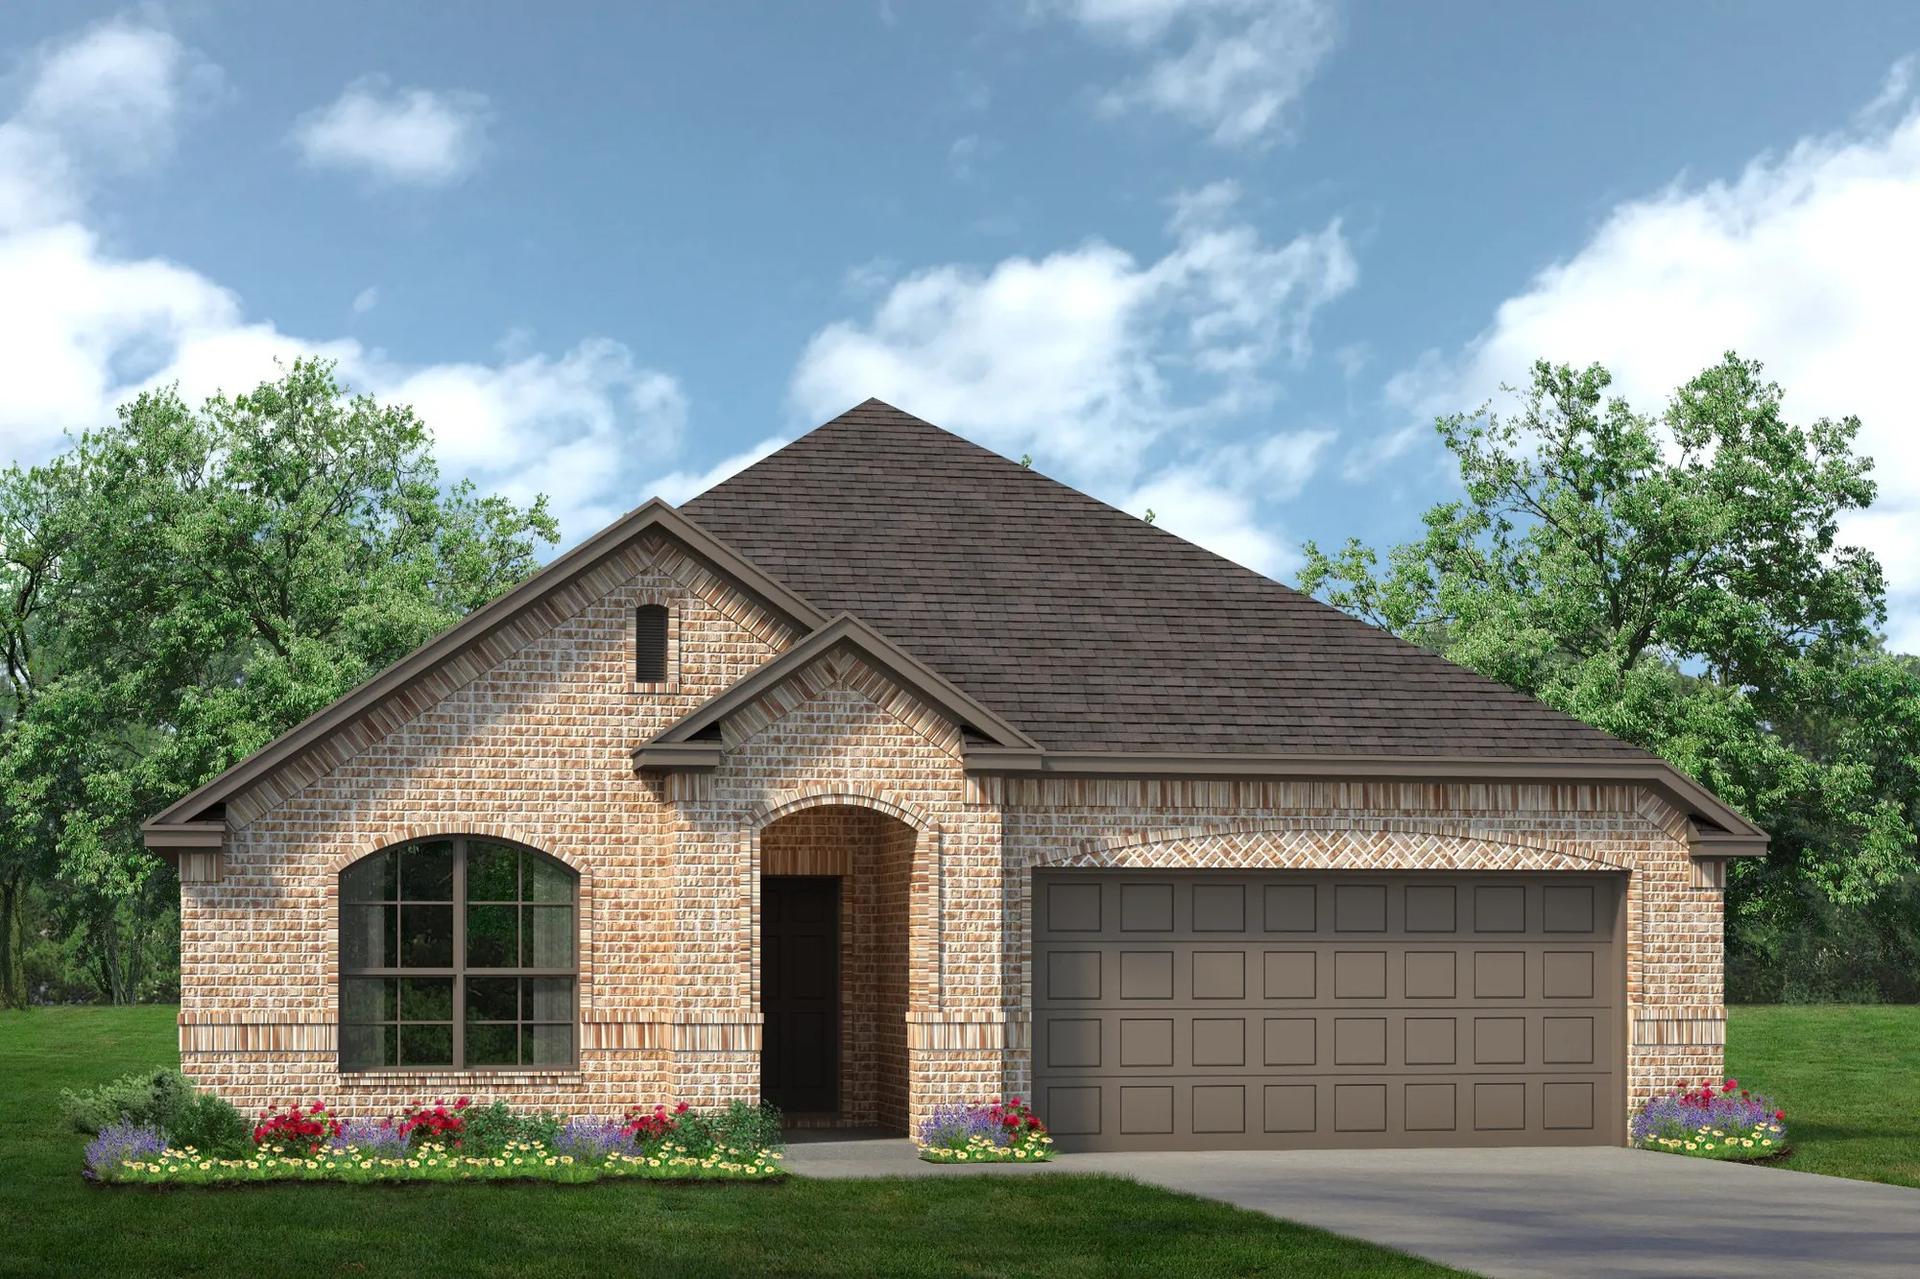 2186 A. Weatherford, TX New Home